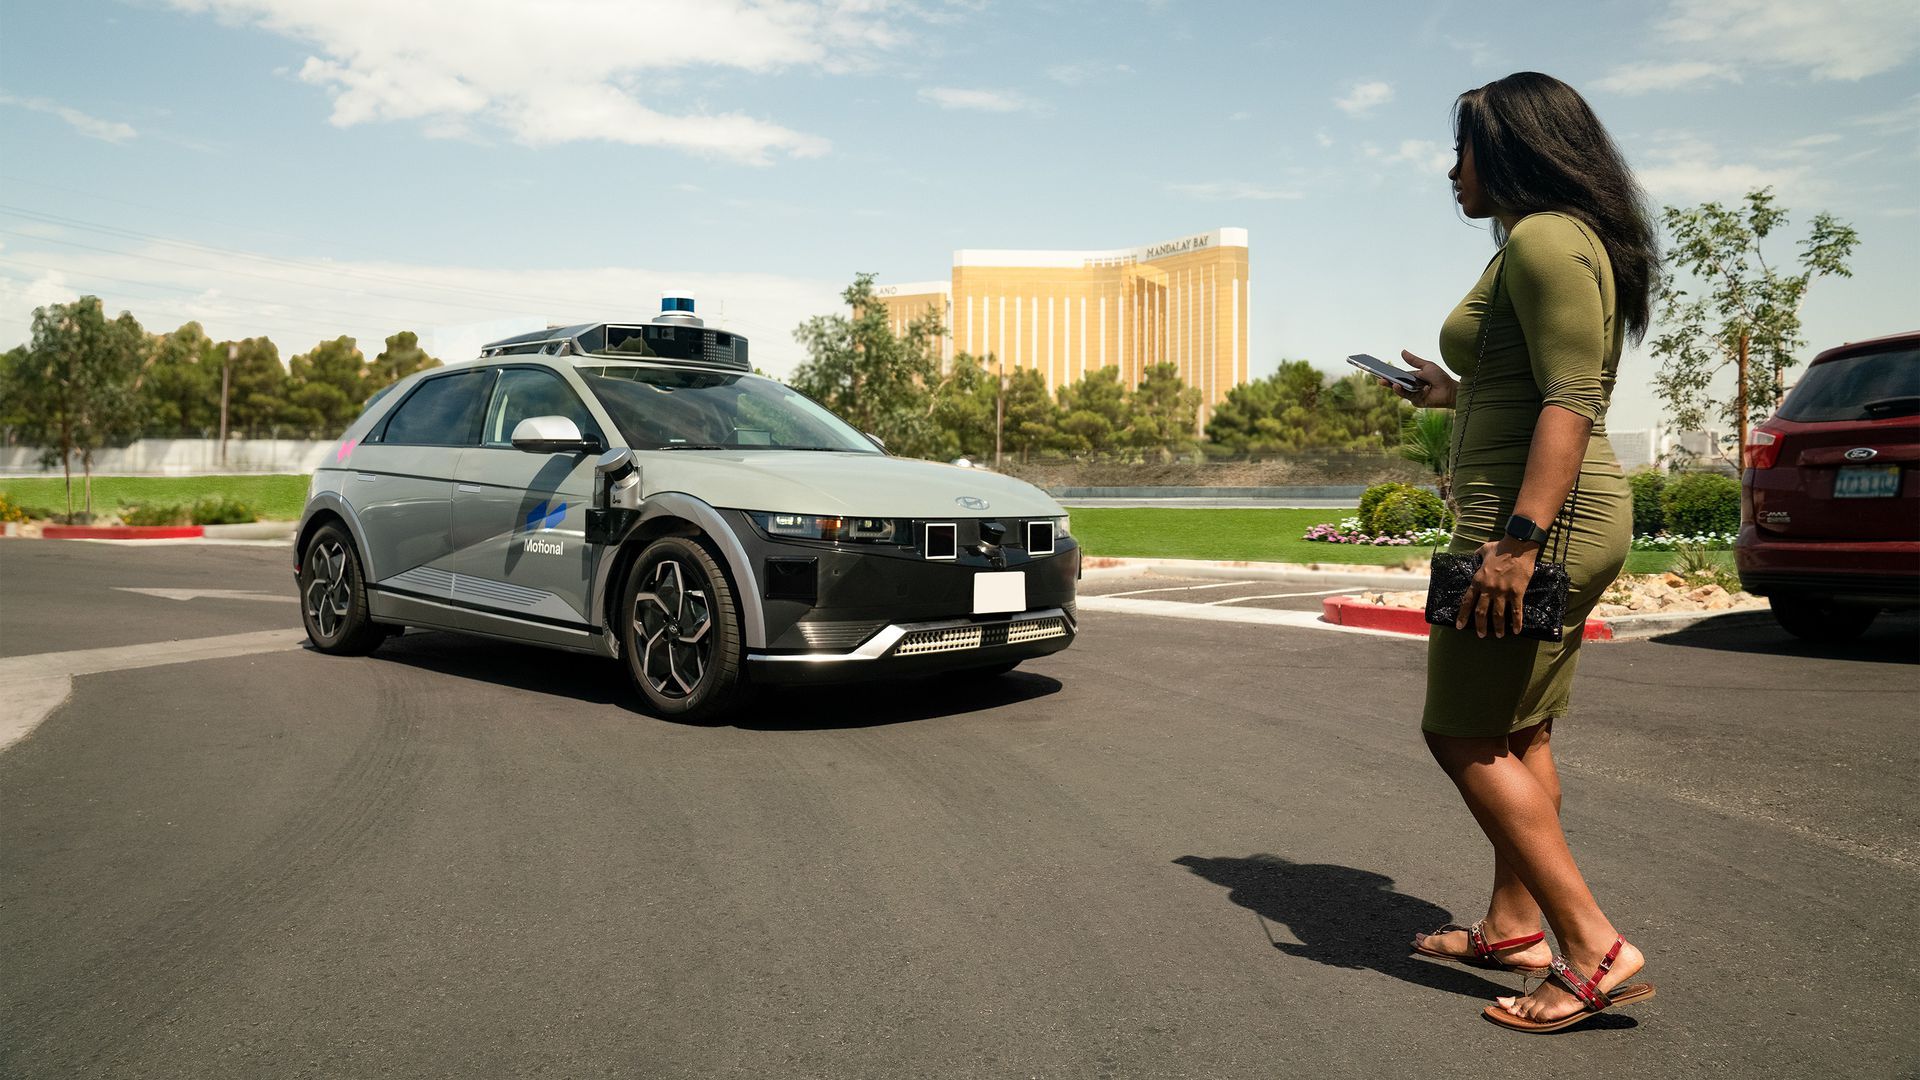 Lyft and Motional are developing robotaxi service in Las Vegas. 